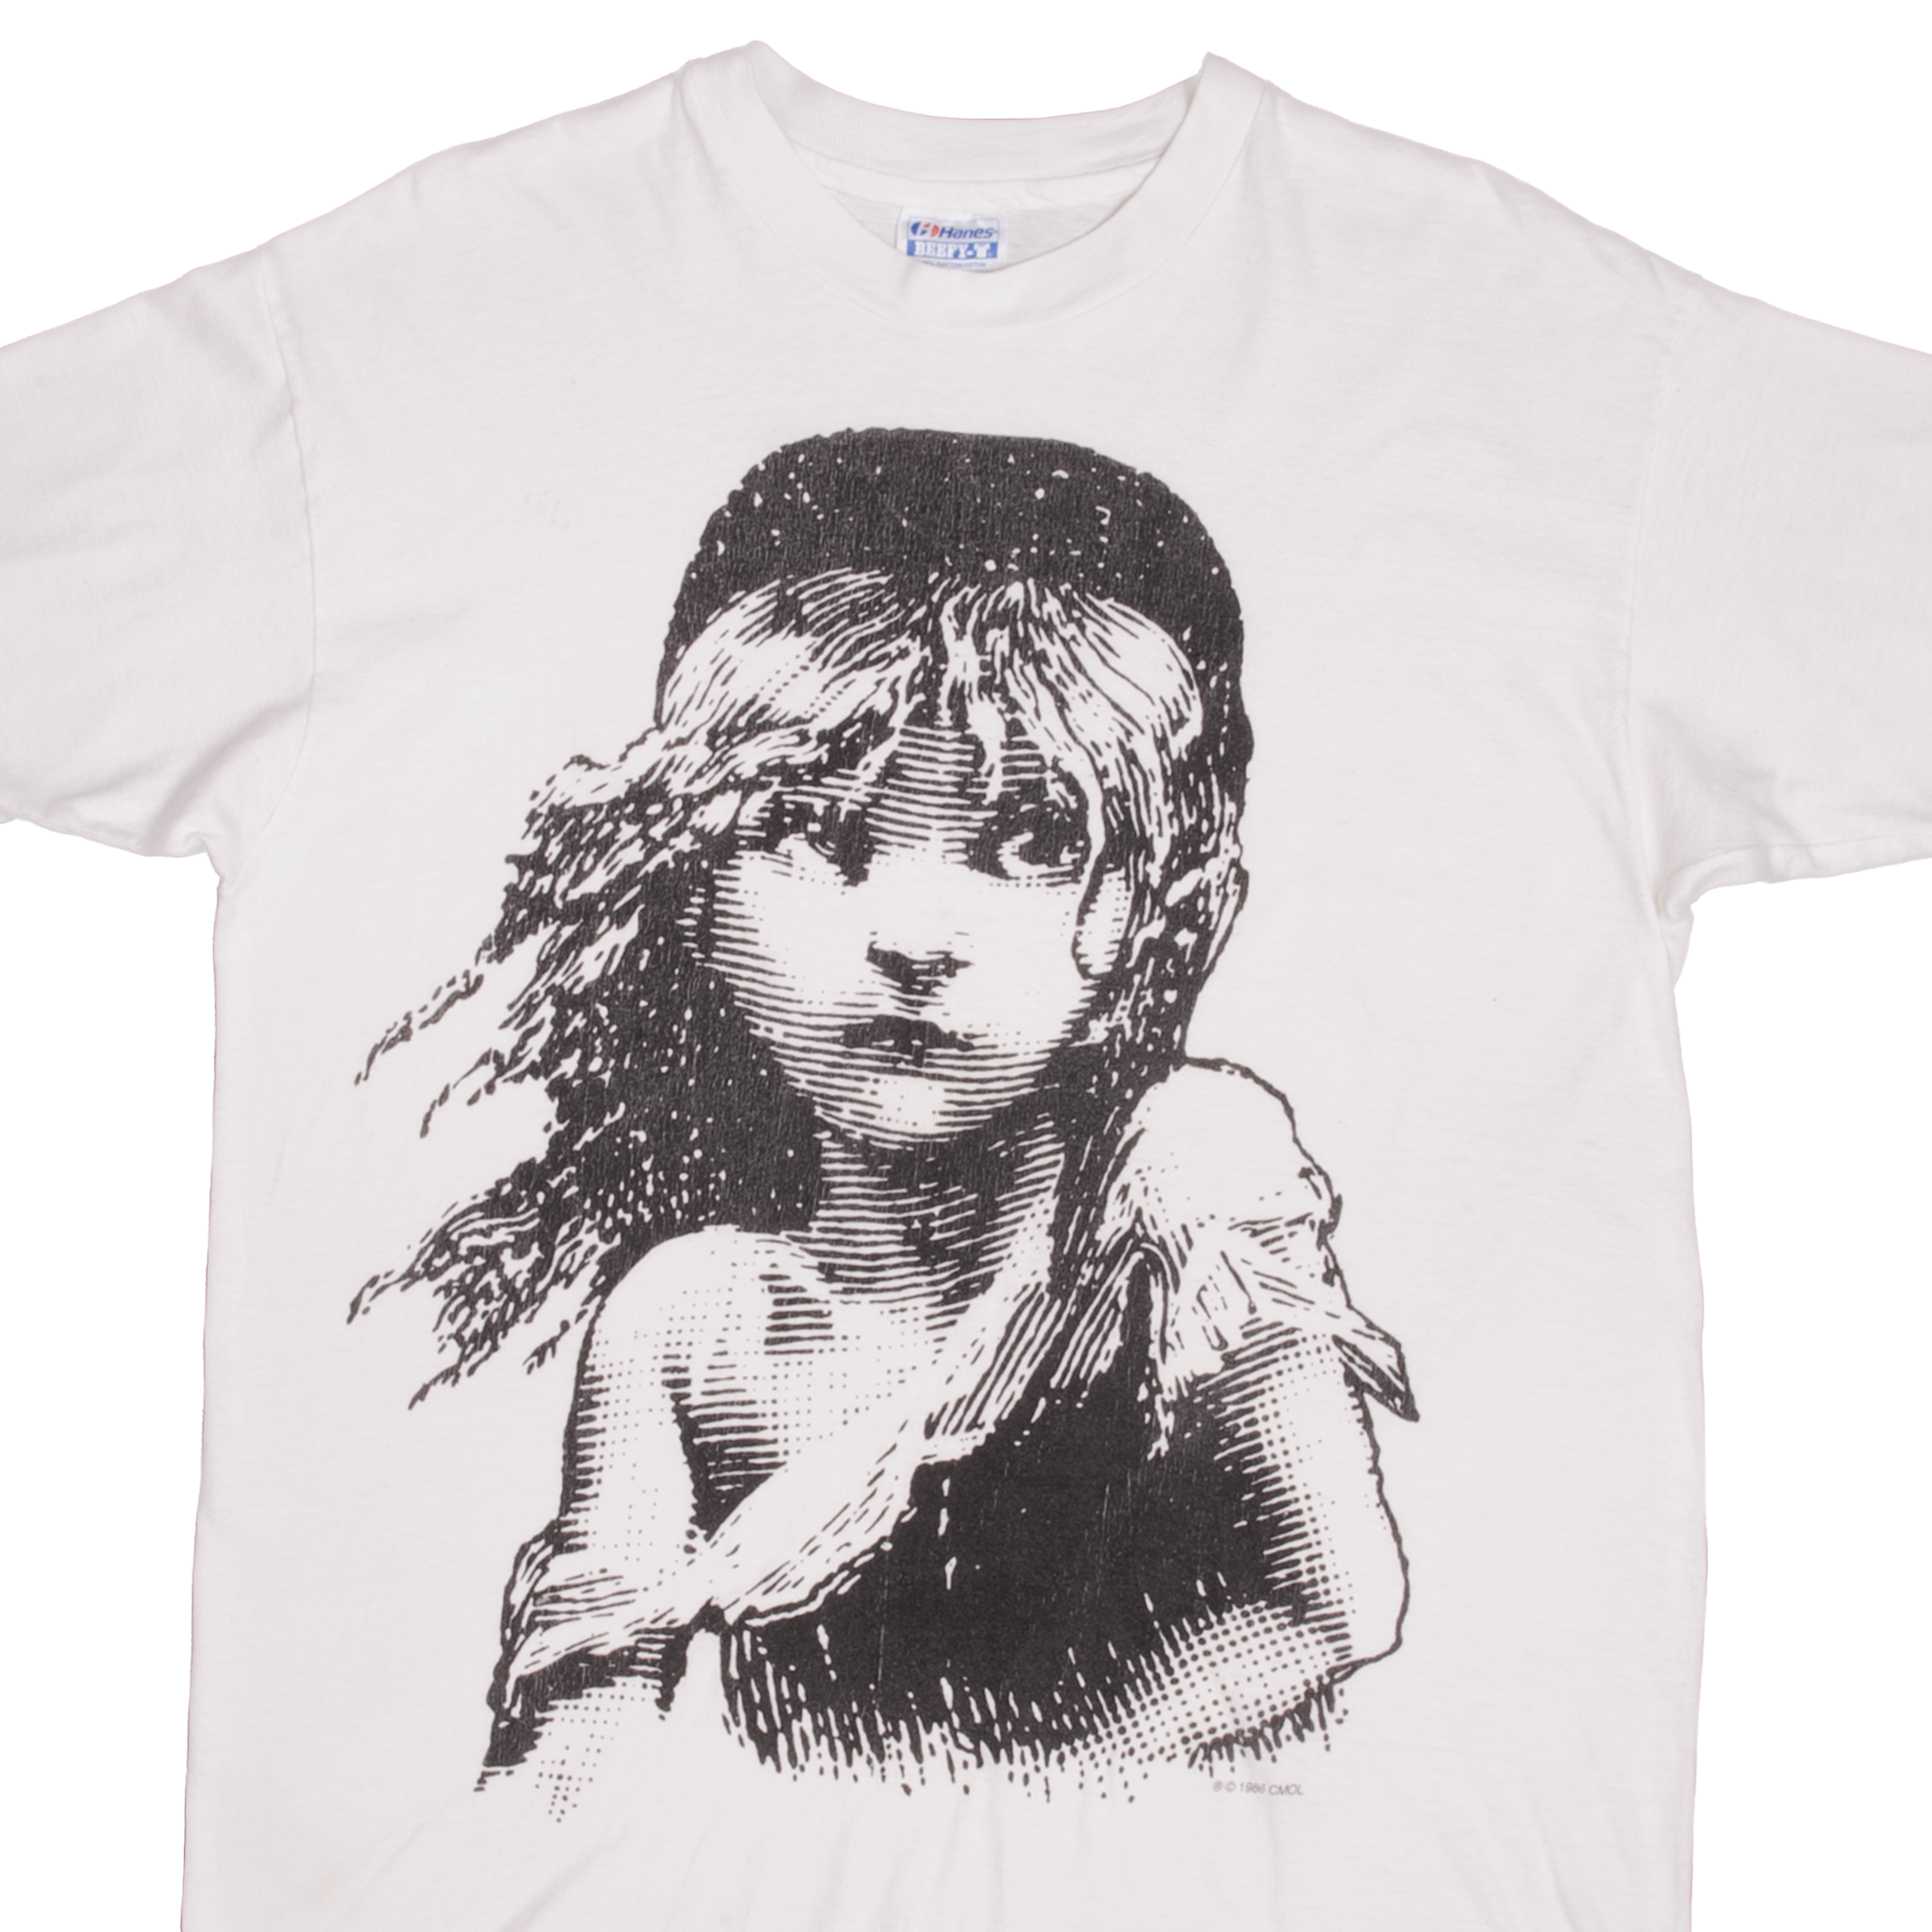 VINTAGE LES MISERABLES 1986 TEE SHIRT SIZE LARGE MADE IN USA